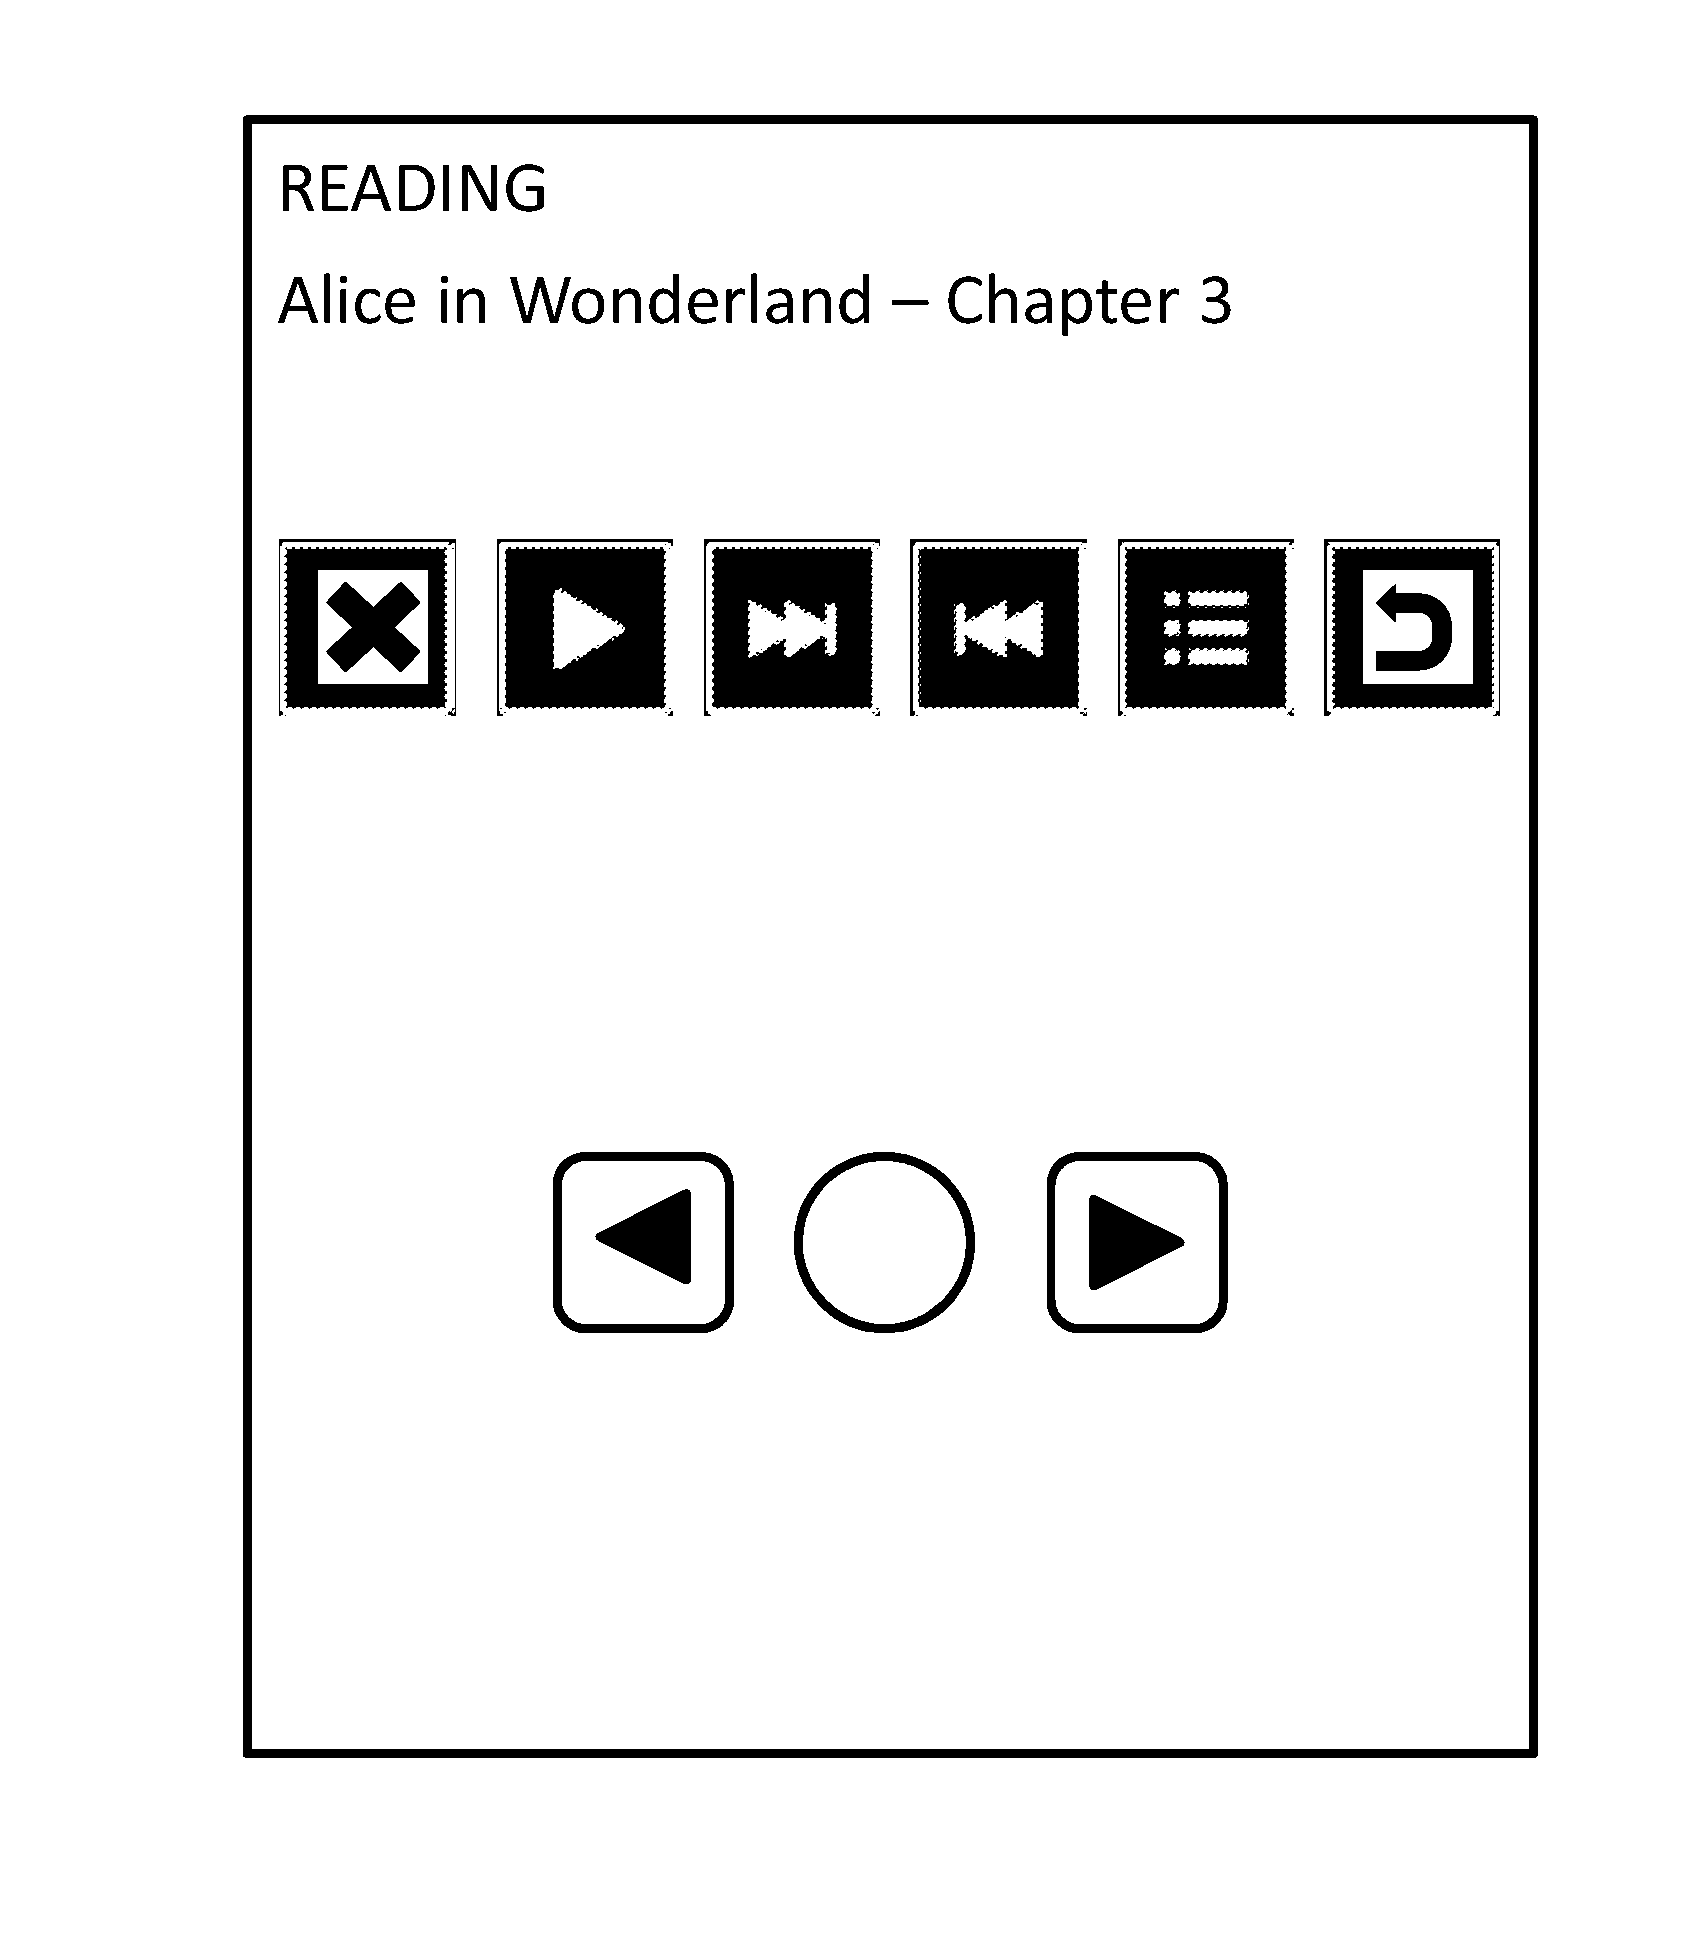 Interface layer and operating system facilitating use, including by blind and visually-impaired users, of touch-screen-controlled consumer electronic devices